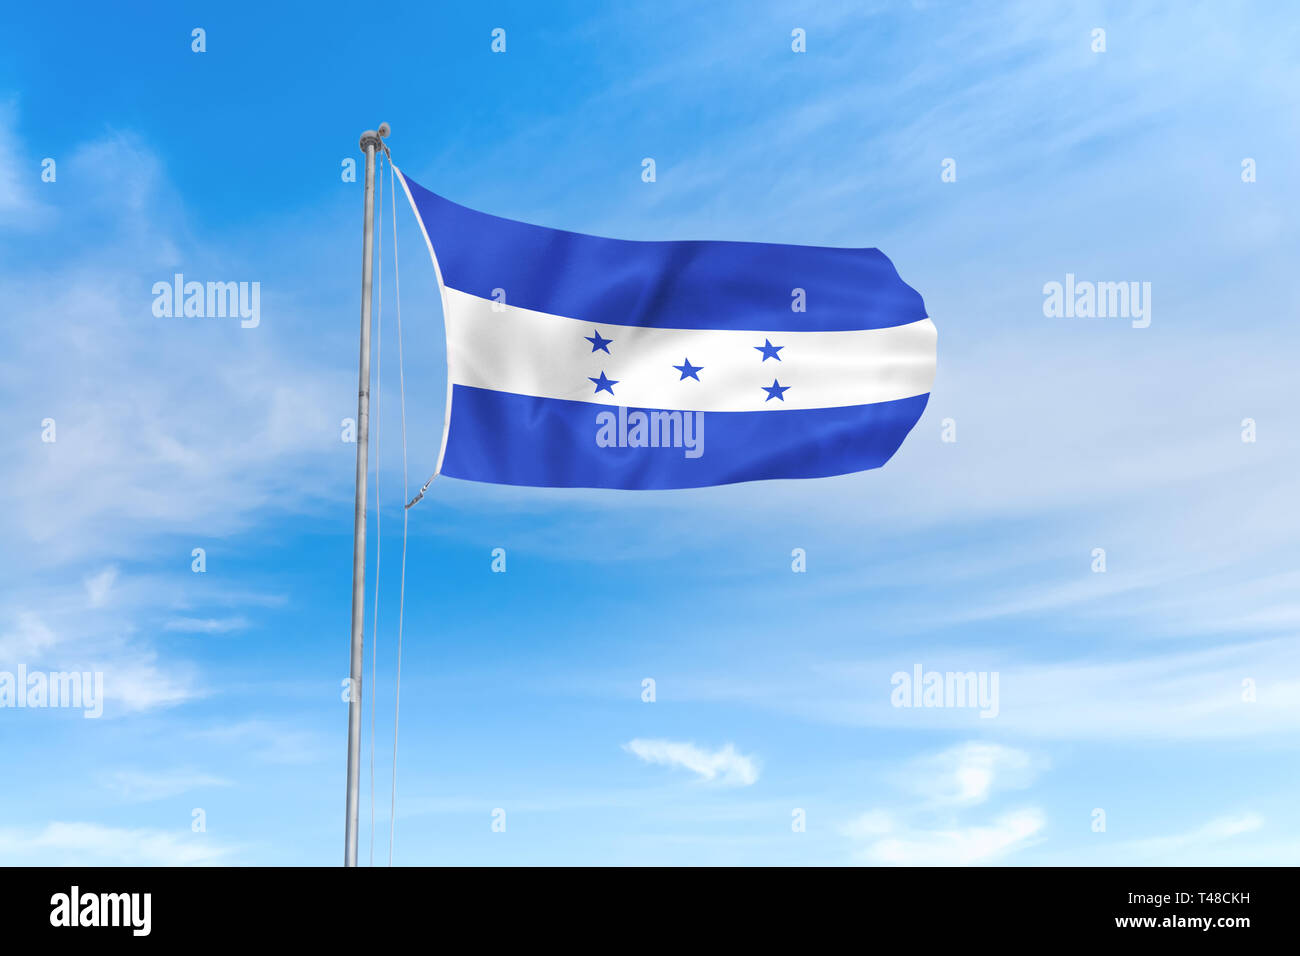 Honduras flag blowing in the wind over nice blue sky background Stock Photo